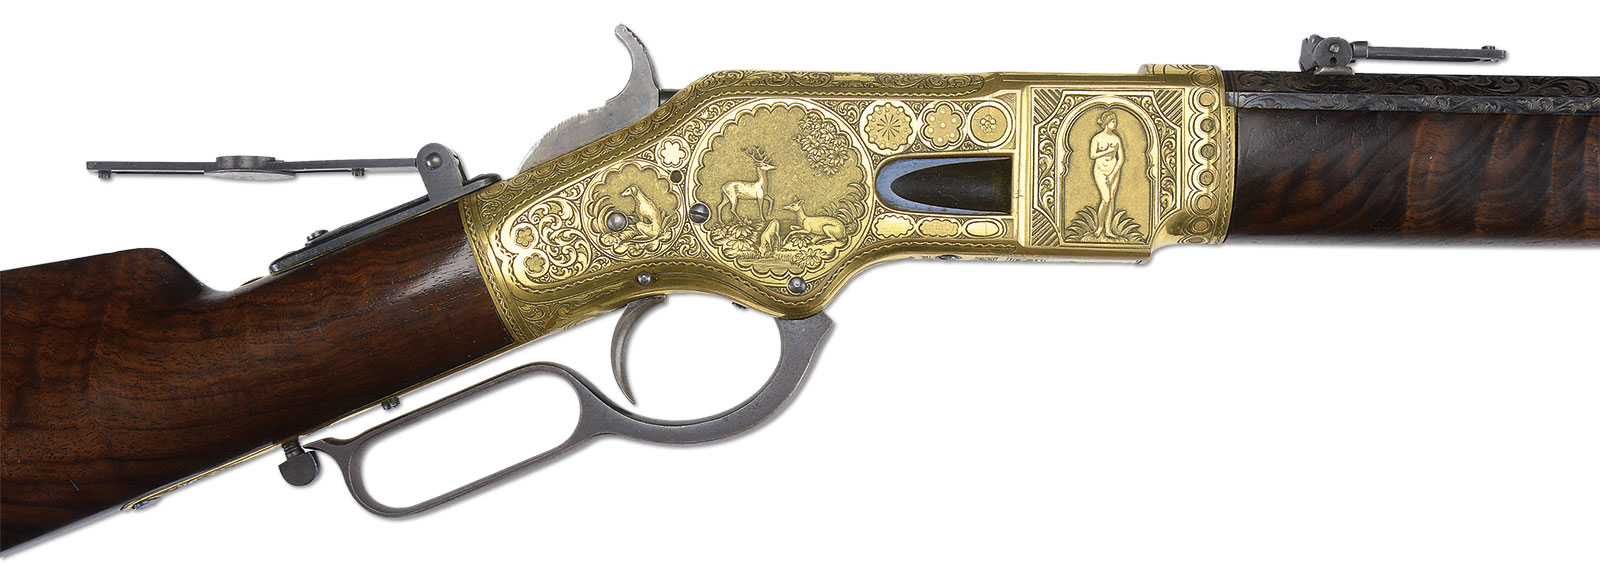 Opulent Relief Engraved Winchester 1866 Rifle